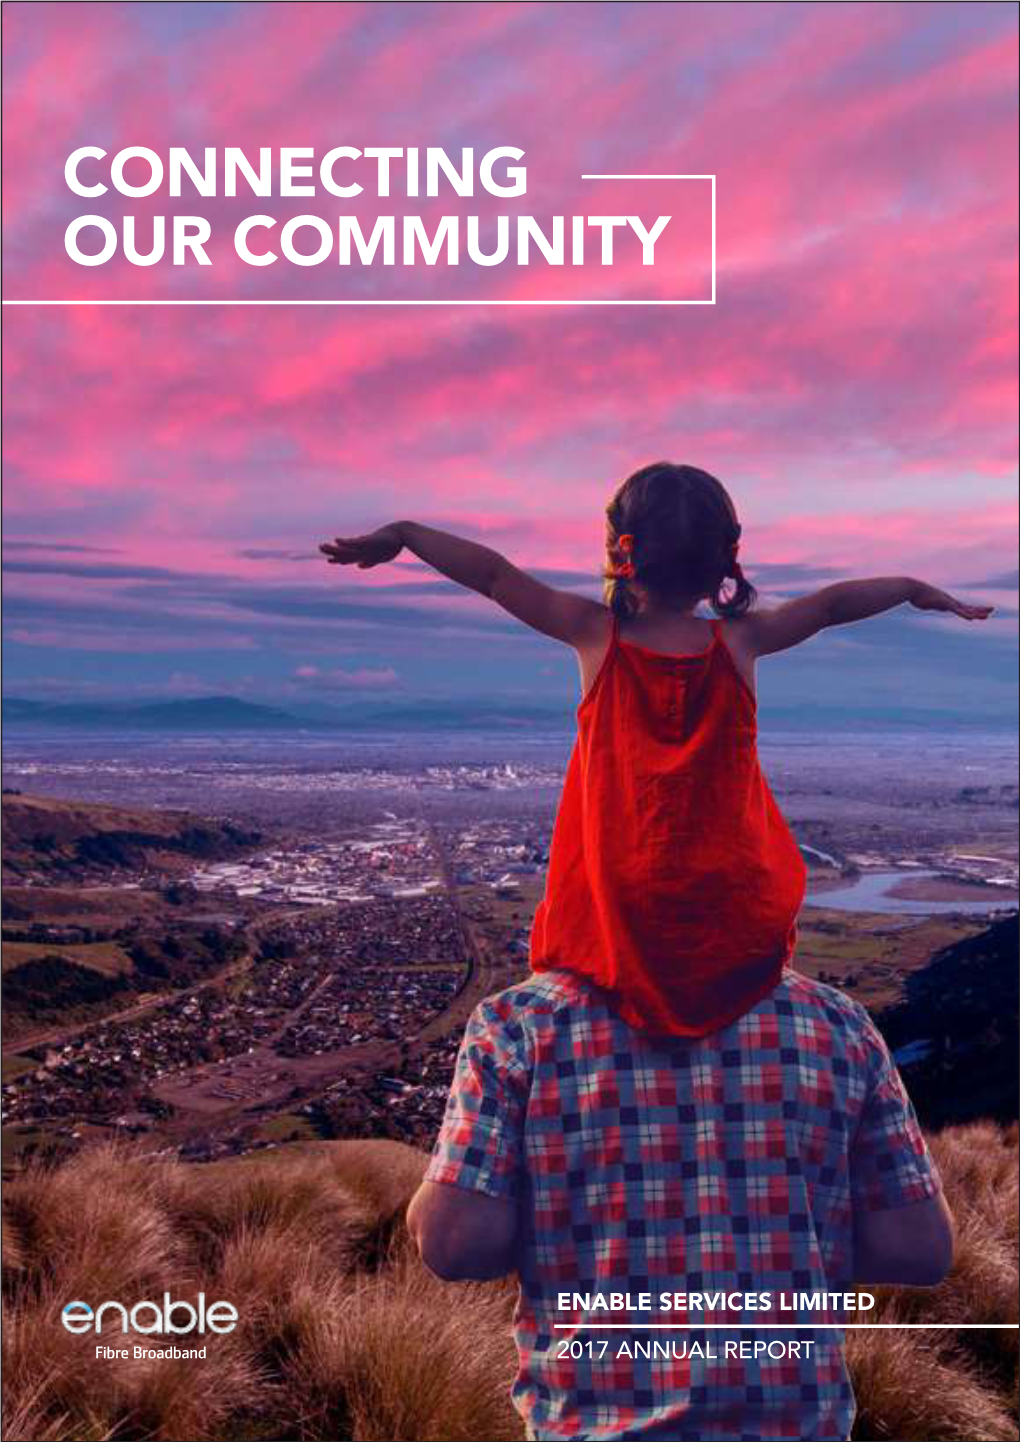 Connecting Our Community with Unlimited Opportunity” Aon Hewitt) Across Enable to 63 Percent